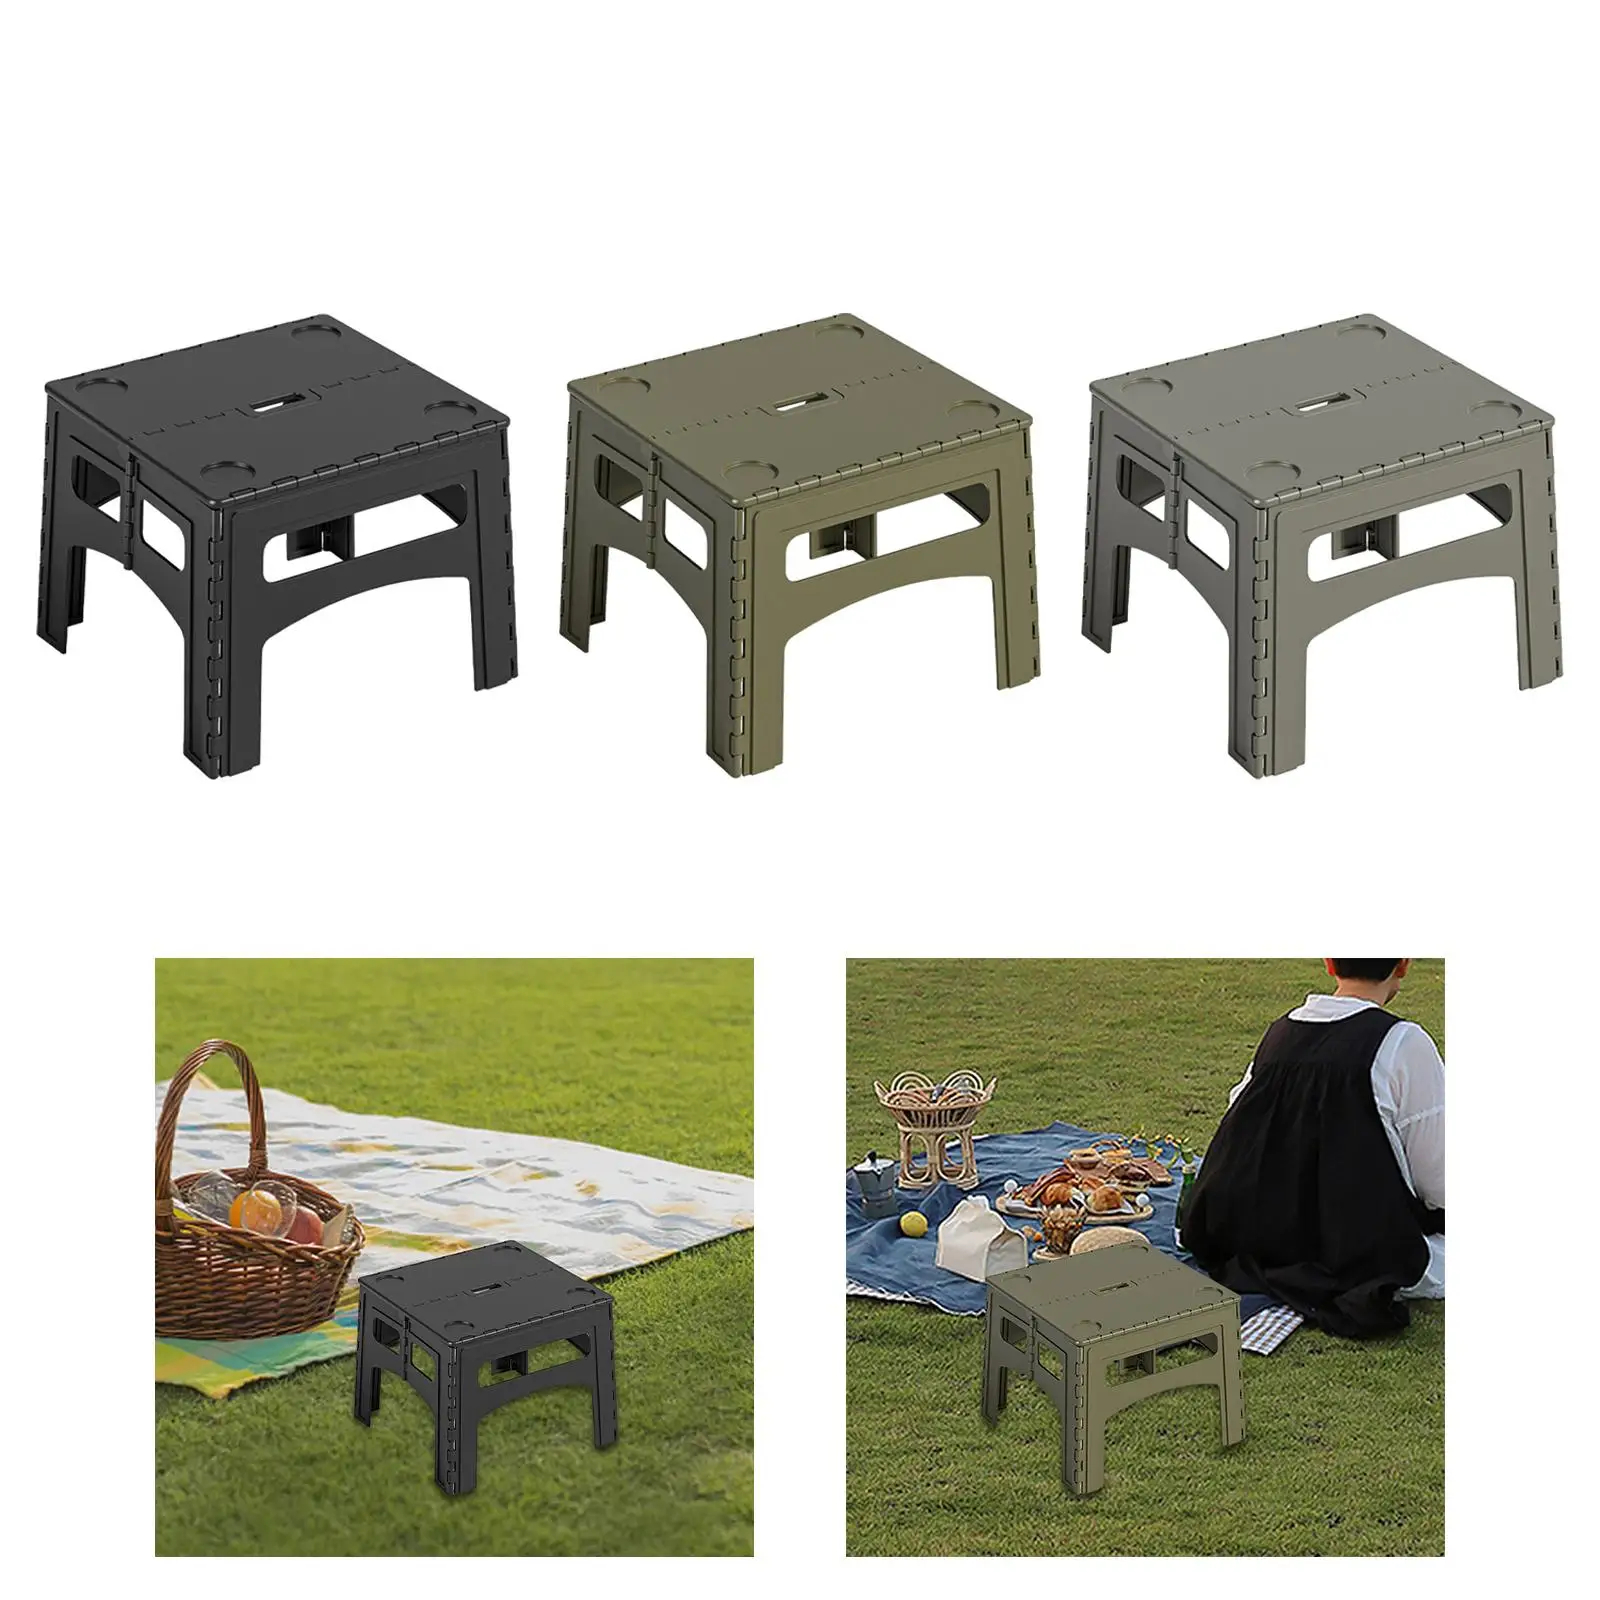 Outdoor Folding Table Foldable Picnic Table Compact Courtyard Table Portable Camping Table for Hiking, Camping, Garden, Deck